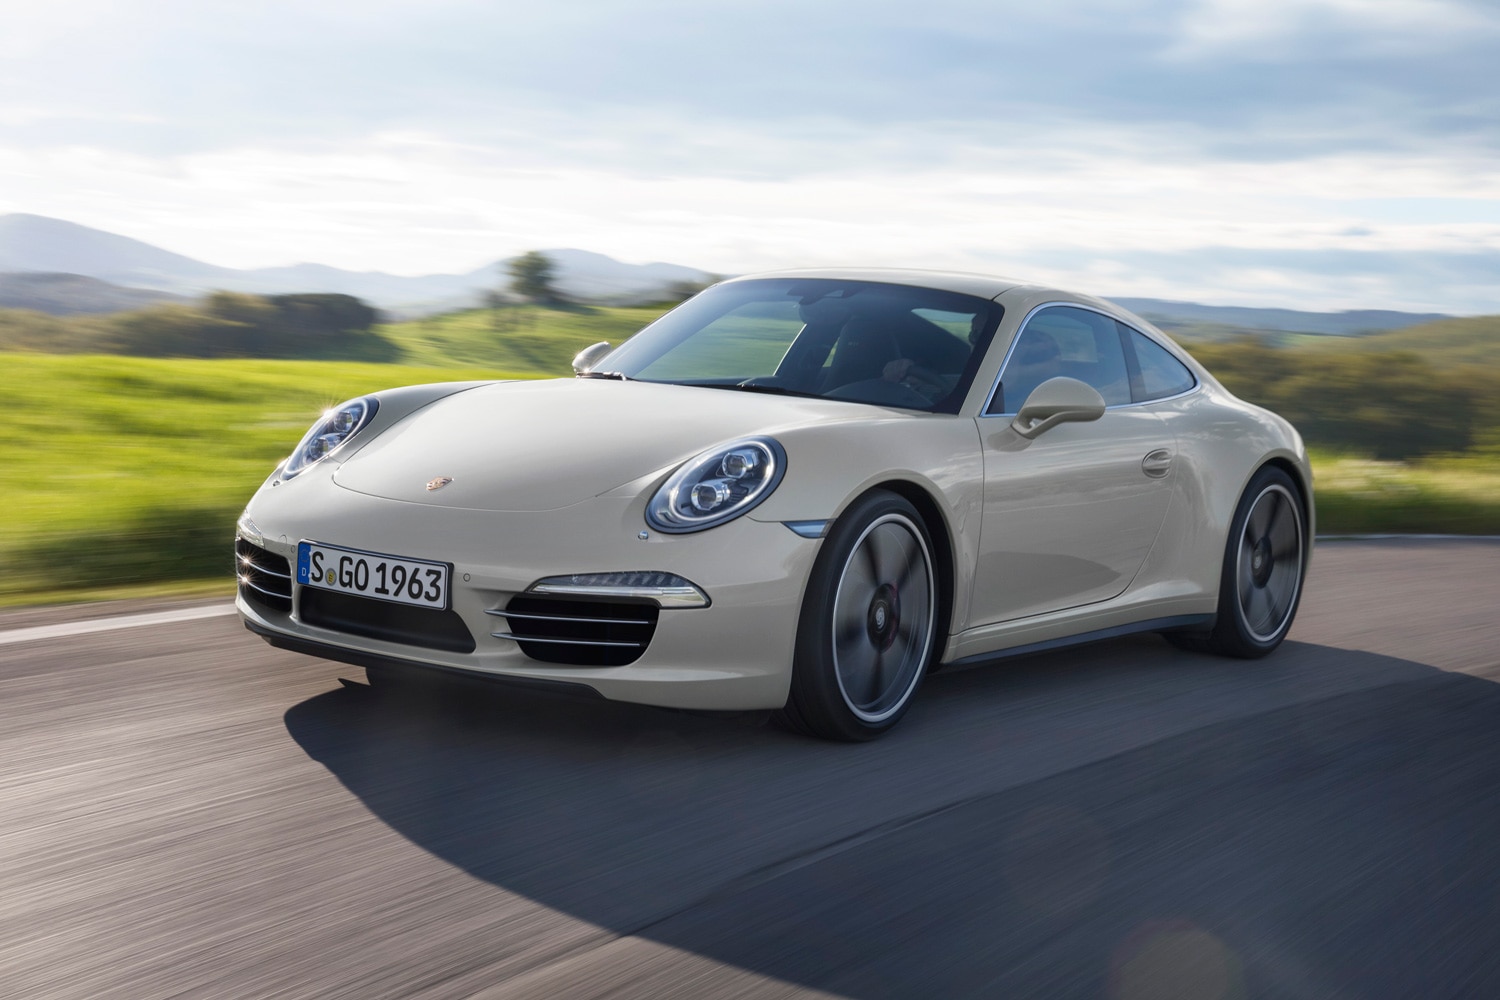 2013 Porsche 911 50th Anniversary Edition driving on a country road